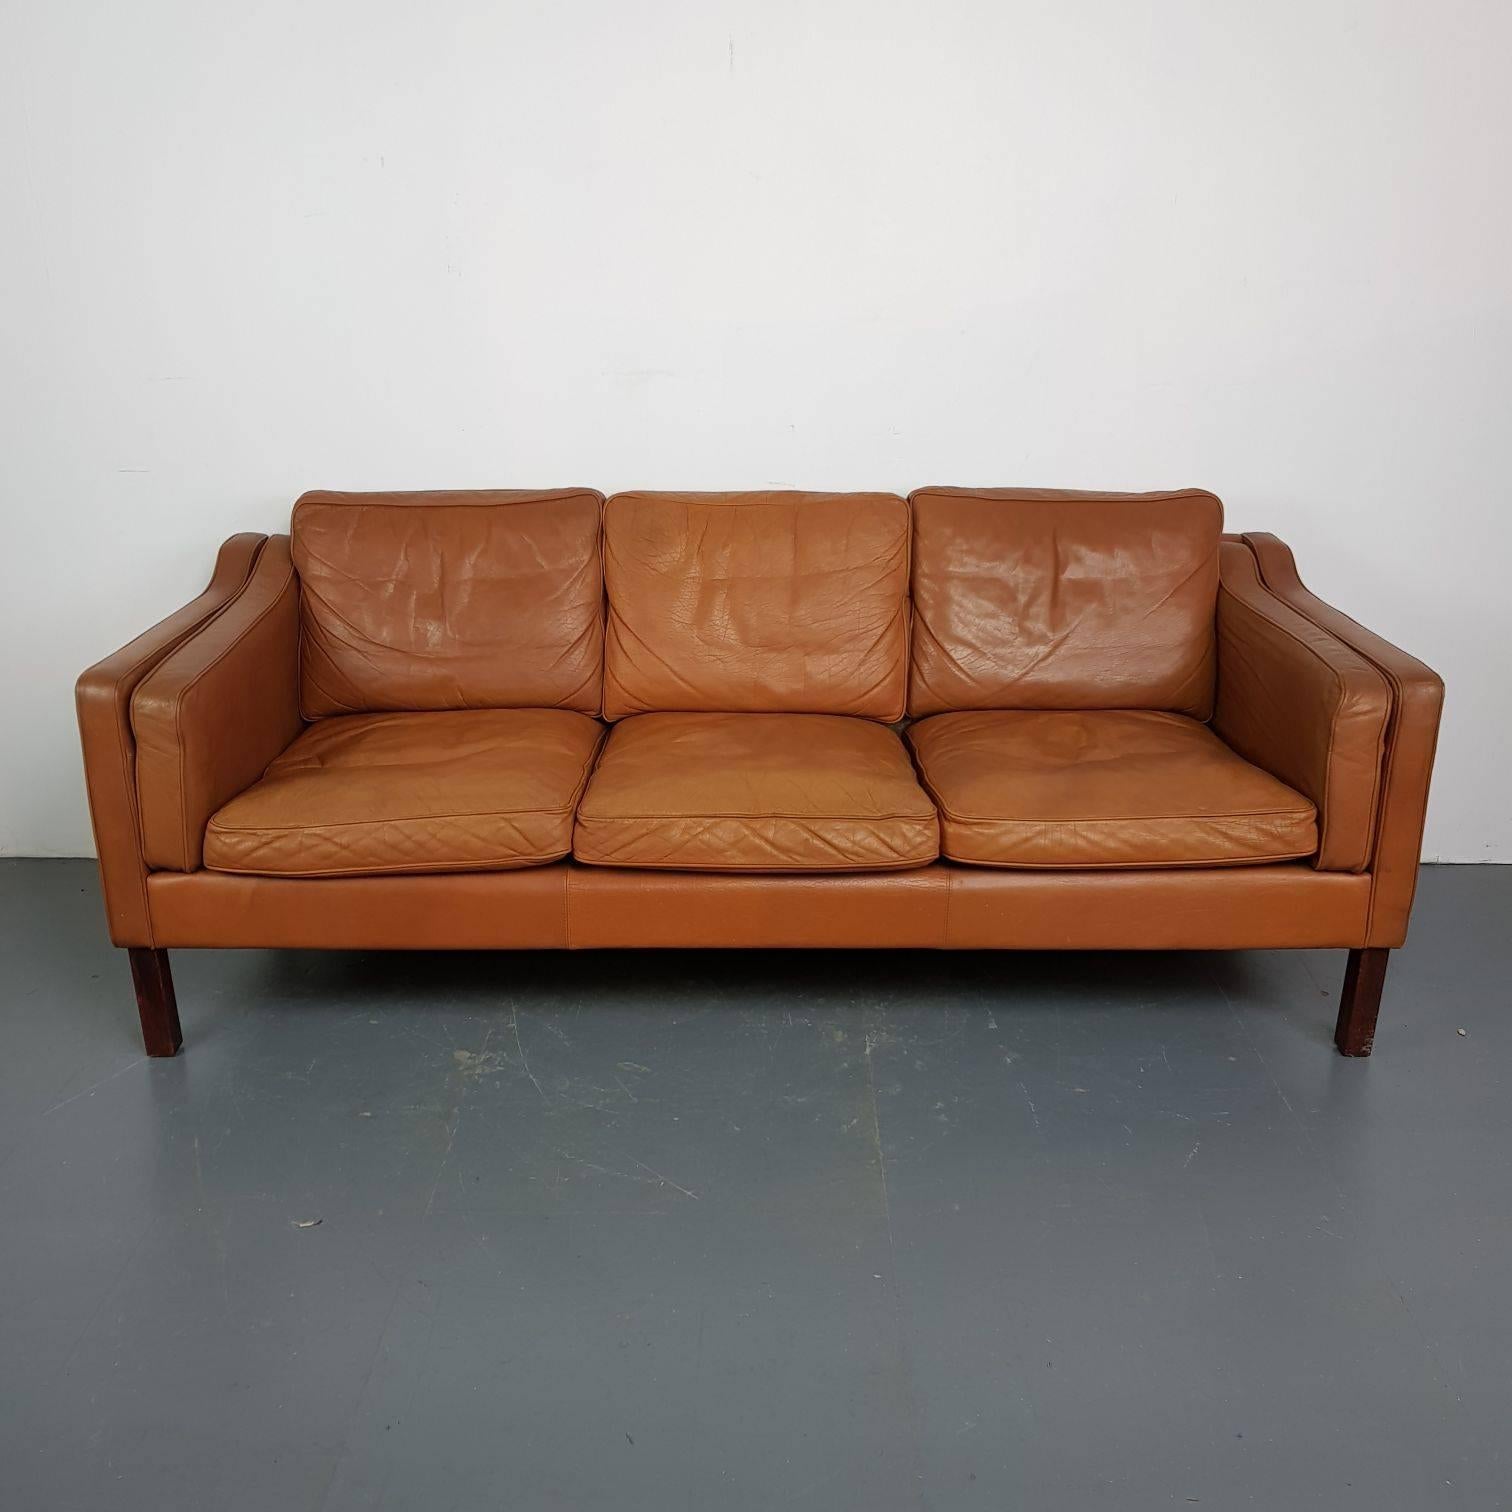 Lovely camel / tan brown leather Mogensen style 1970s three-seat Danish sofa.

Detachable seat cushions. Beech legs.

Width: 193cm

Height: 75cm

Depth: 79cm

Seat height: 44cm.

In good vintage condition; some age-related wear, but nothing